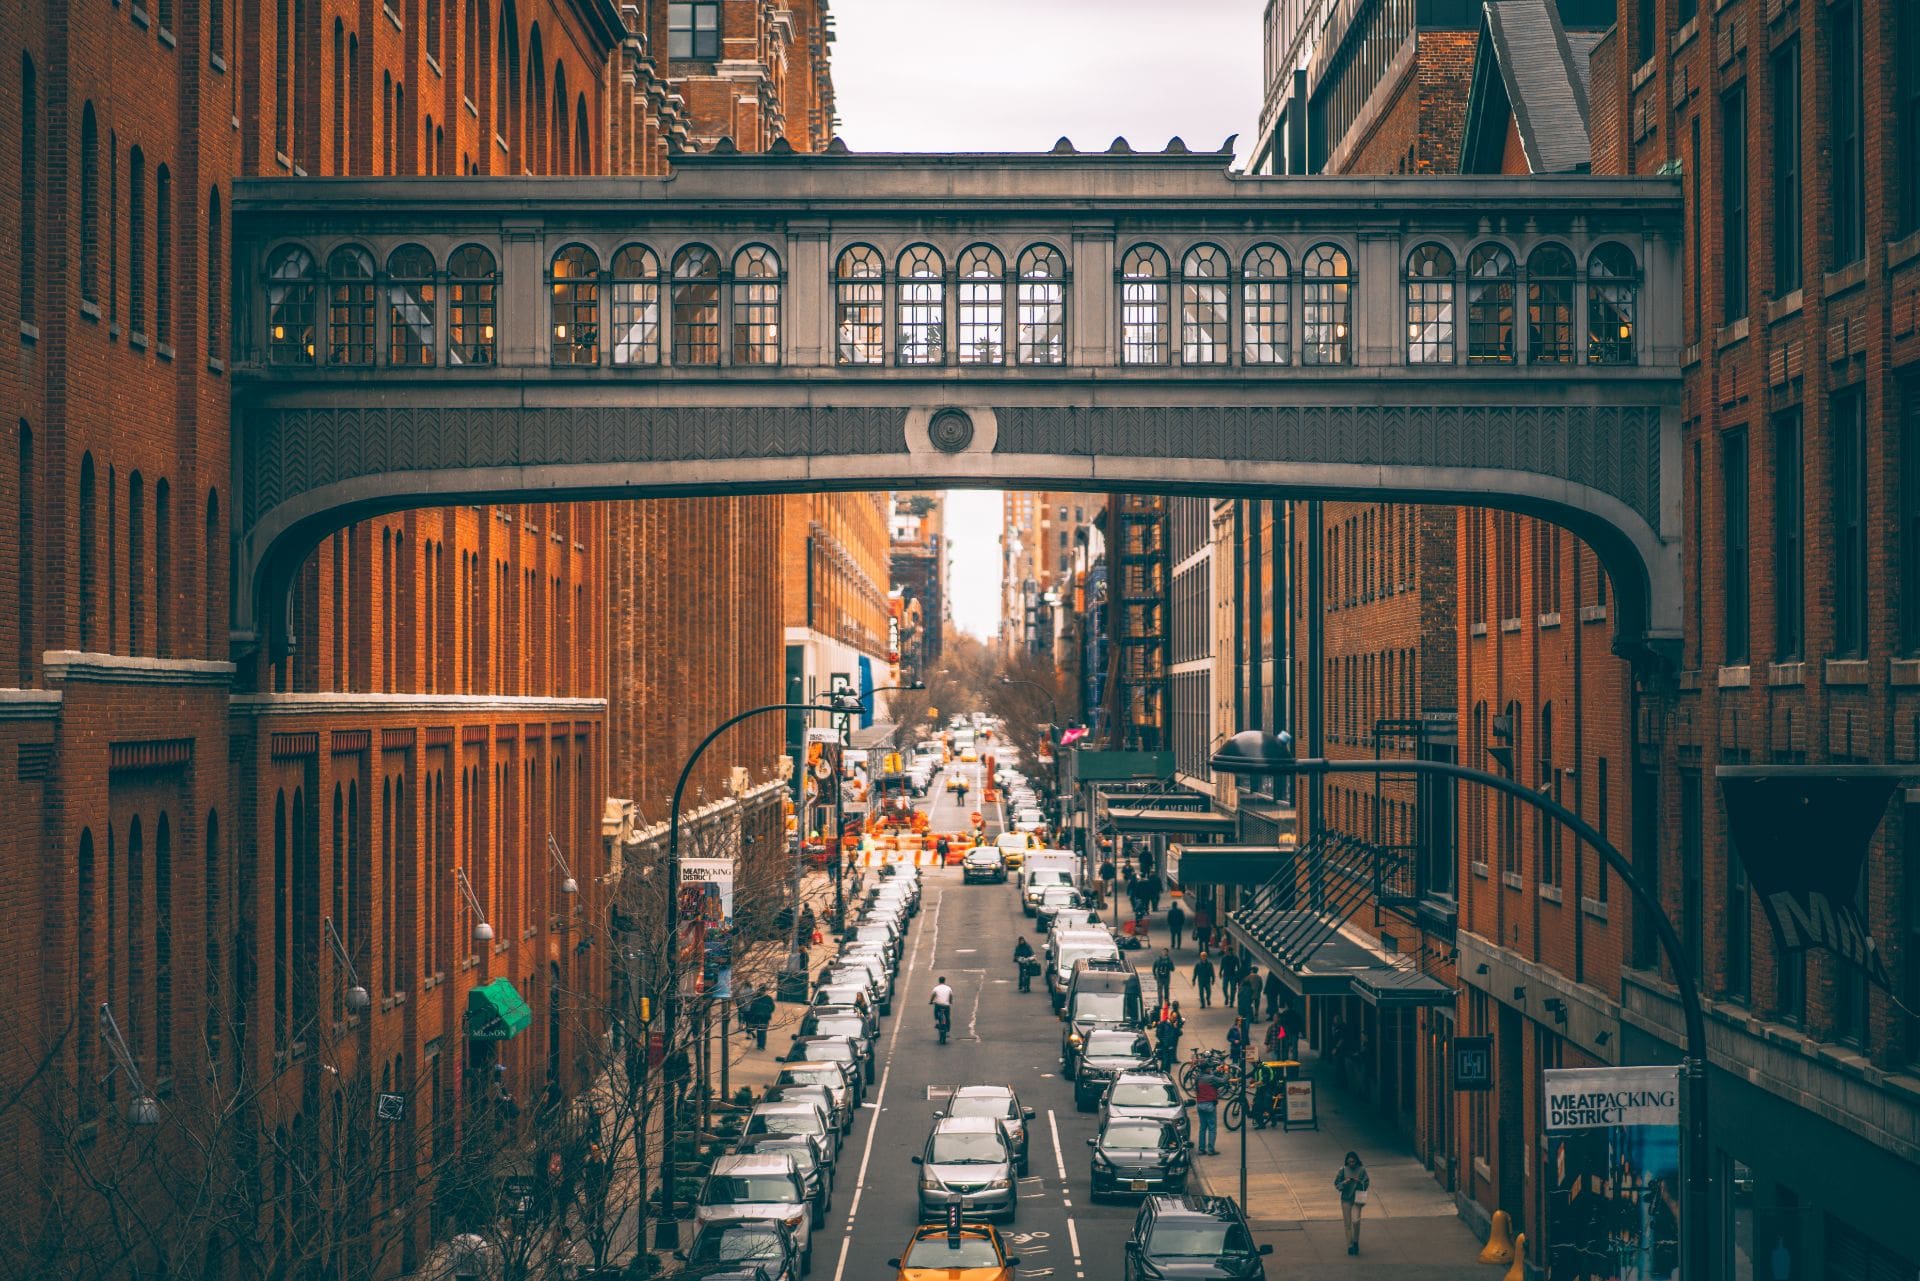 iconic-bridge-across-busy-manhattan-street-in-meatpacking-district-photographed-from-view-from-the-high-line-new-york-in-4-days